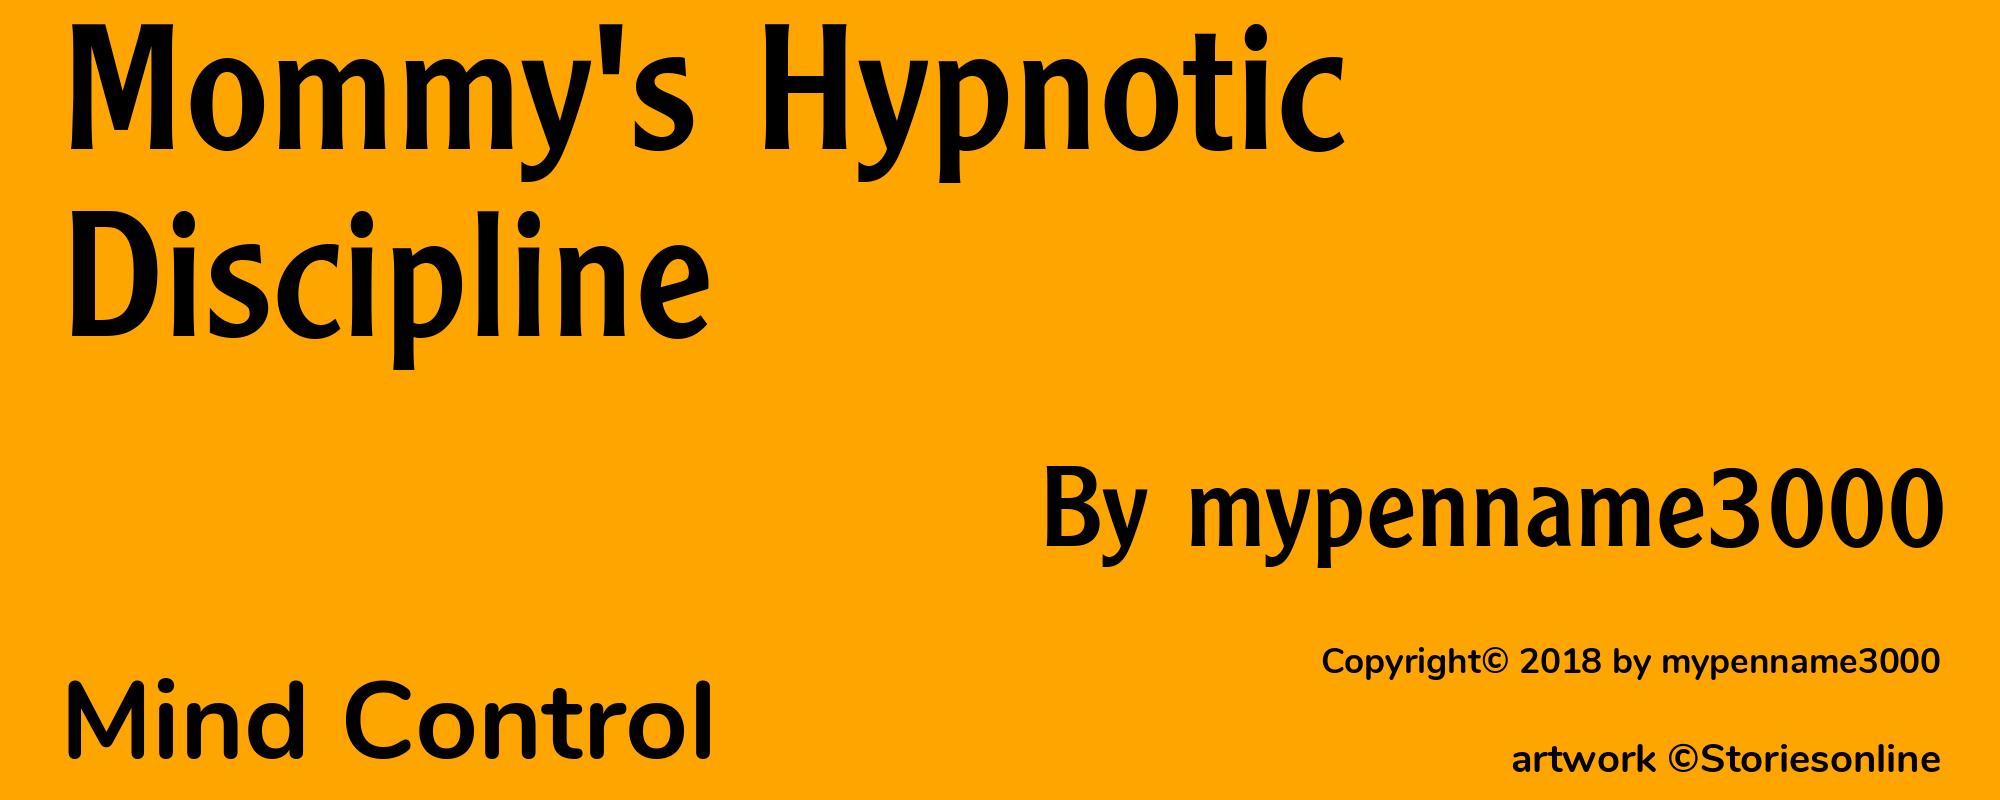 Mommy's Hypnotic Discipline - Cover